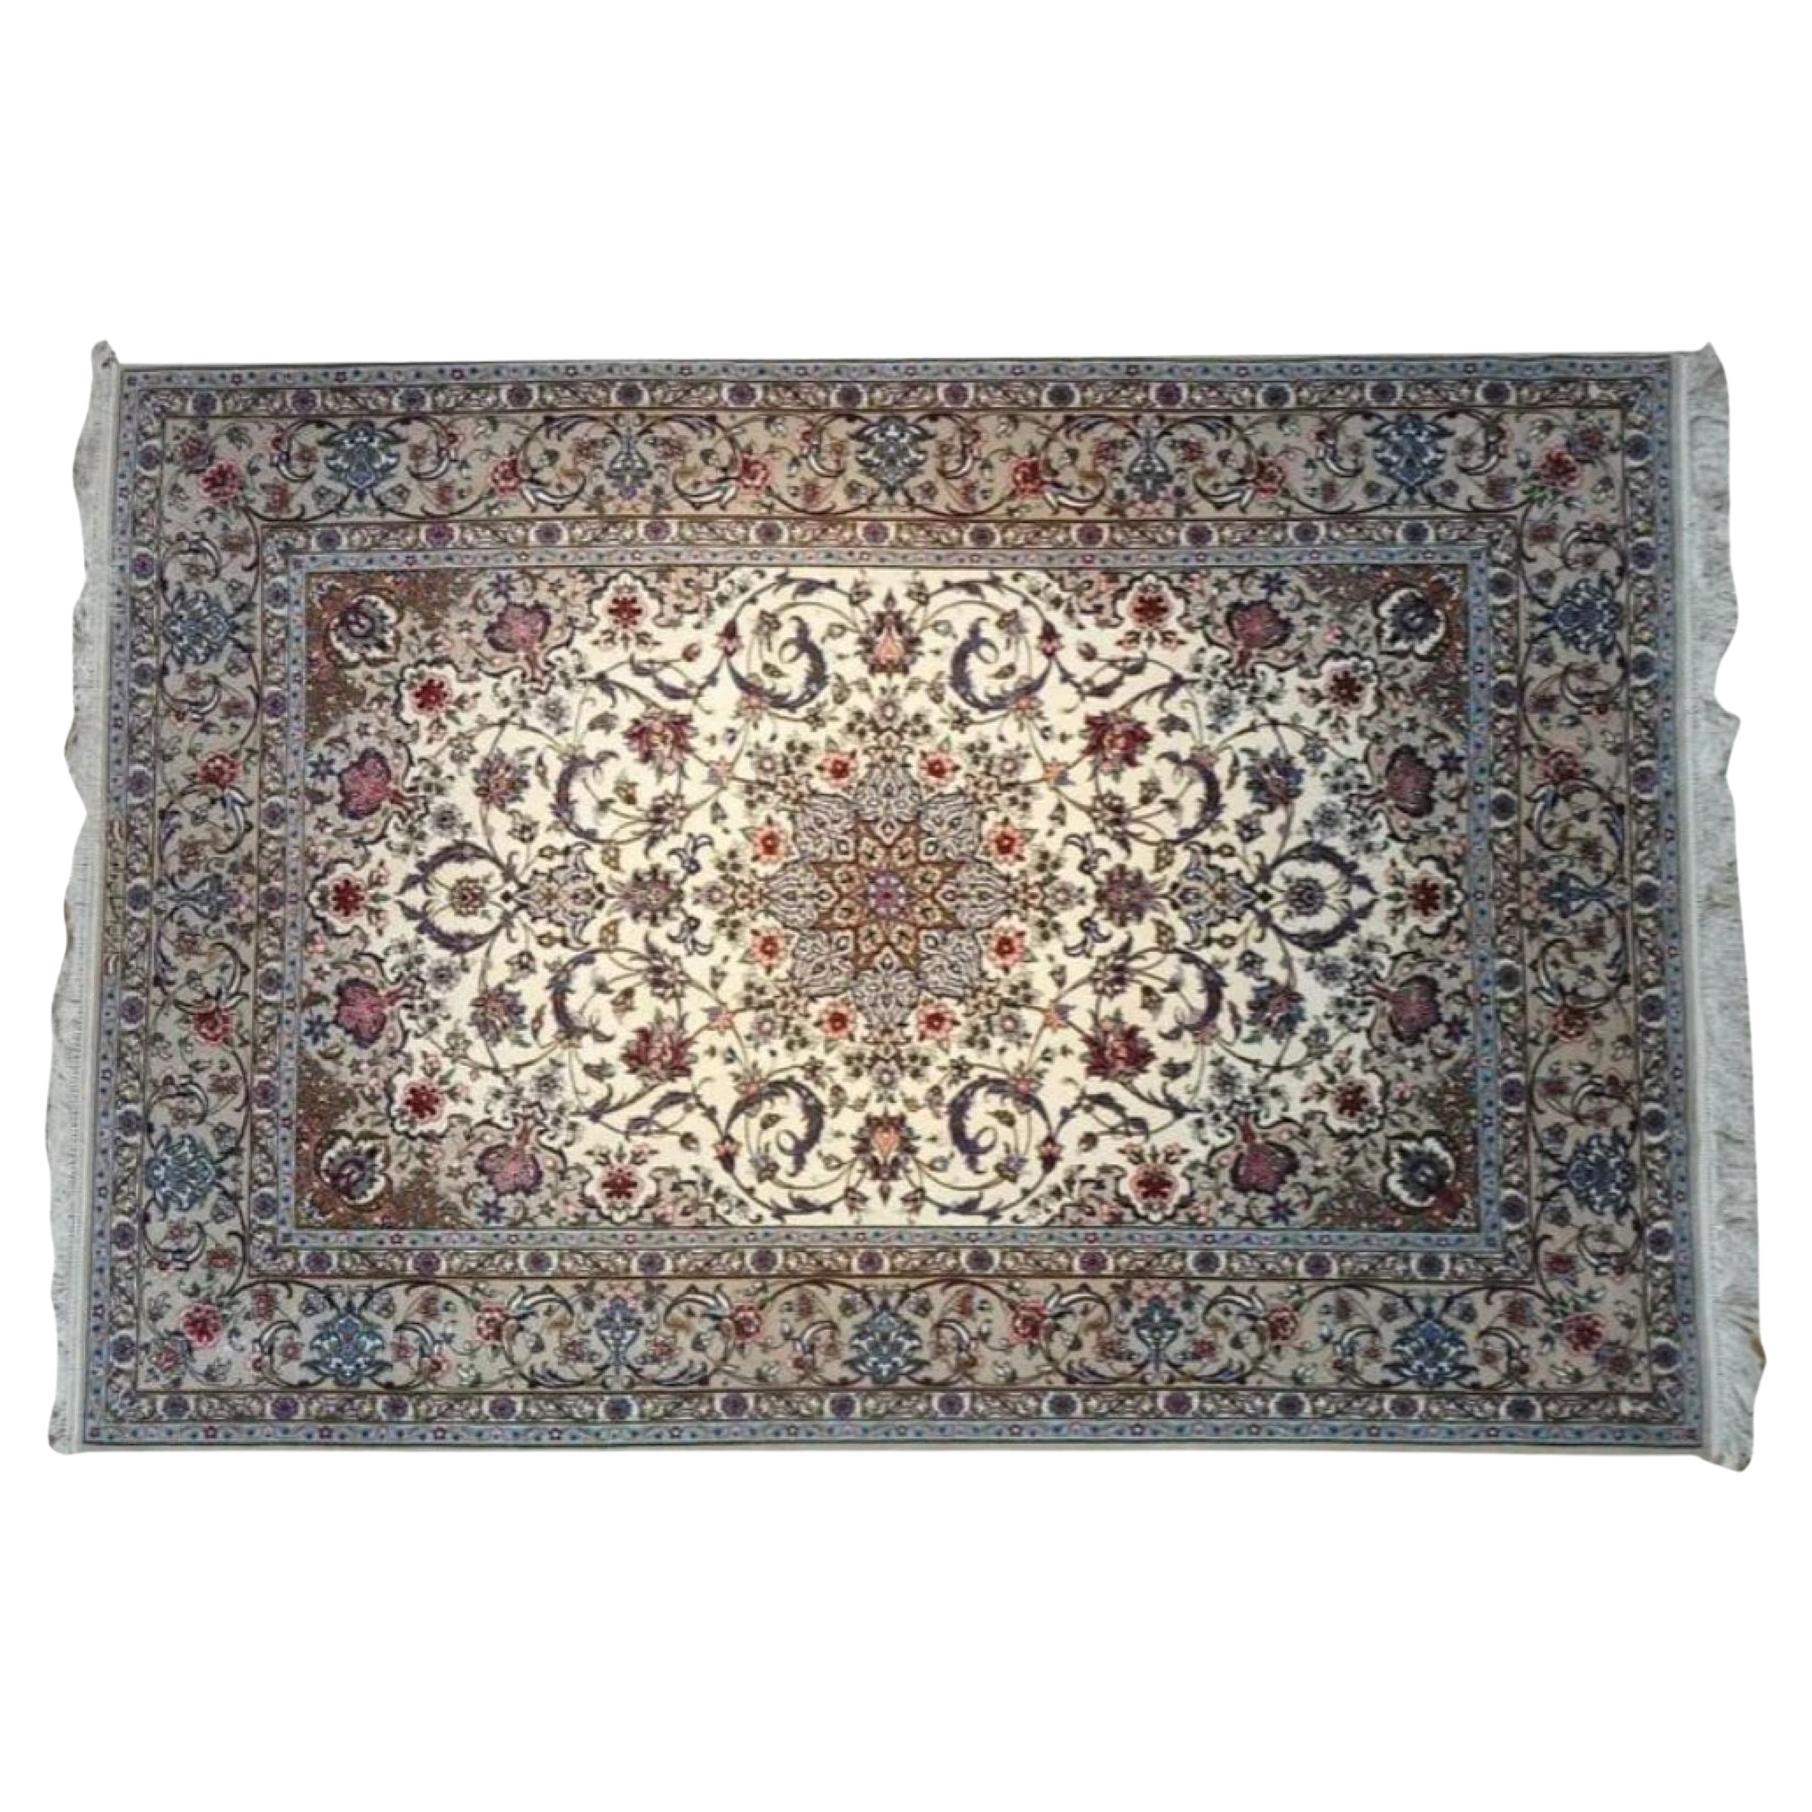 Very fine Persian Isfahan Silk & Wool Rug - 7.6' x 5' For Sale